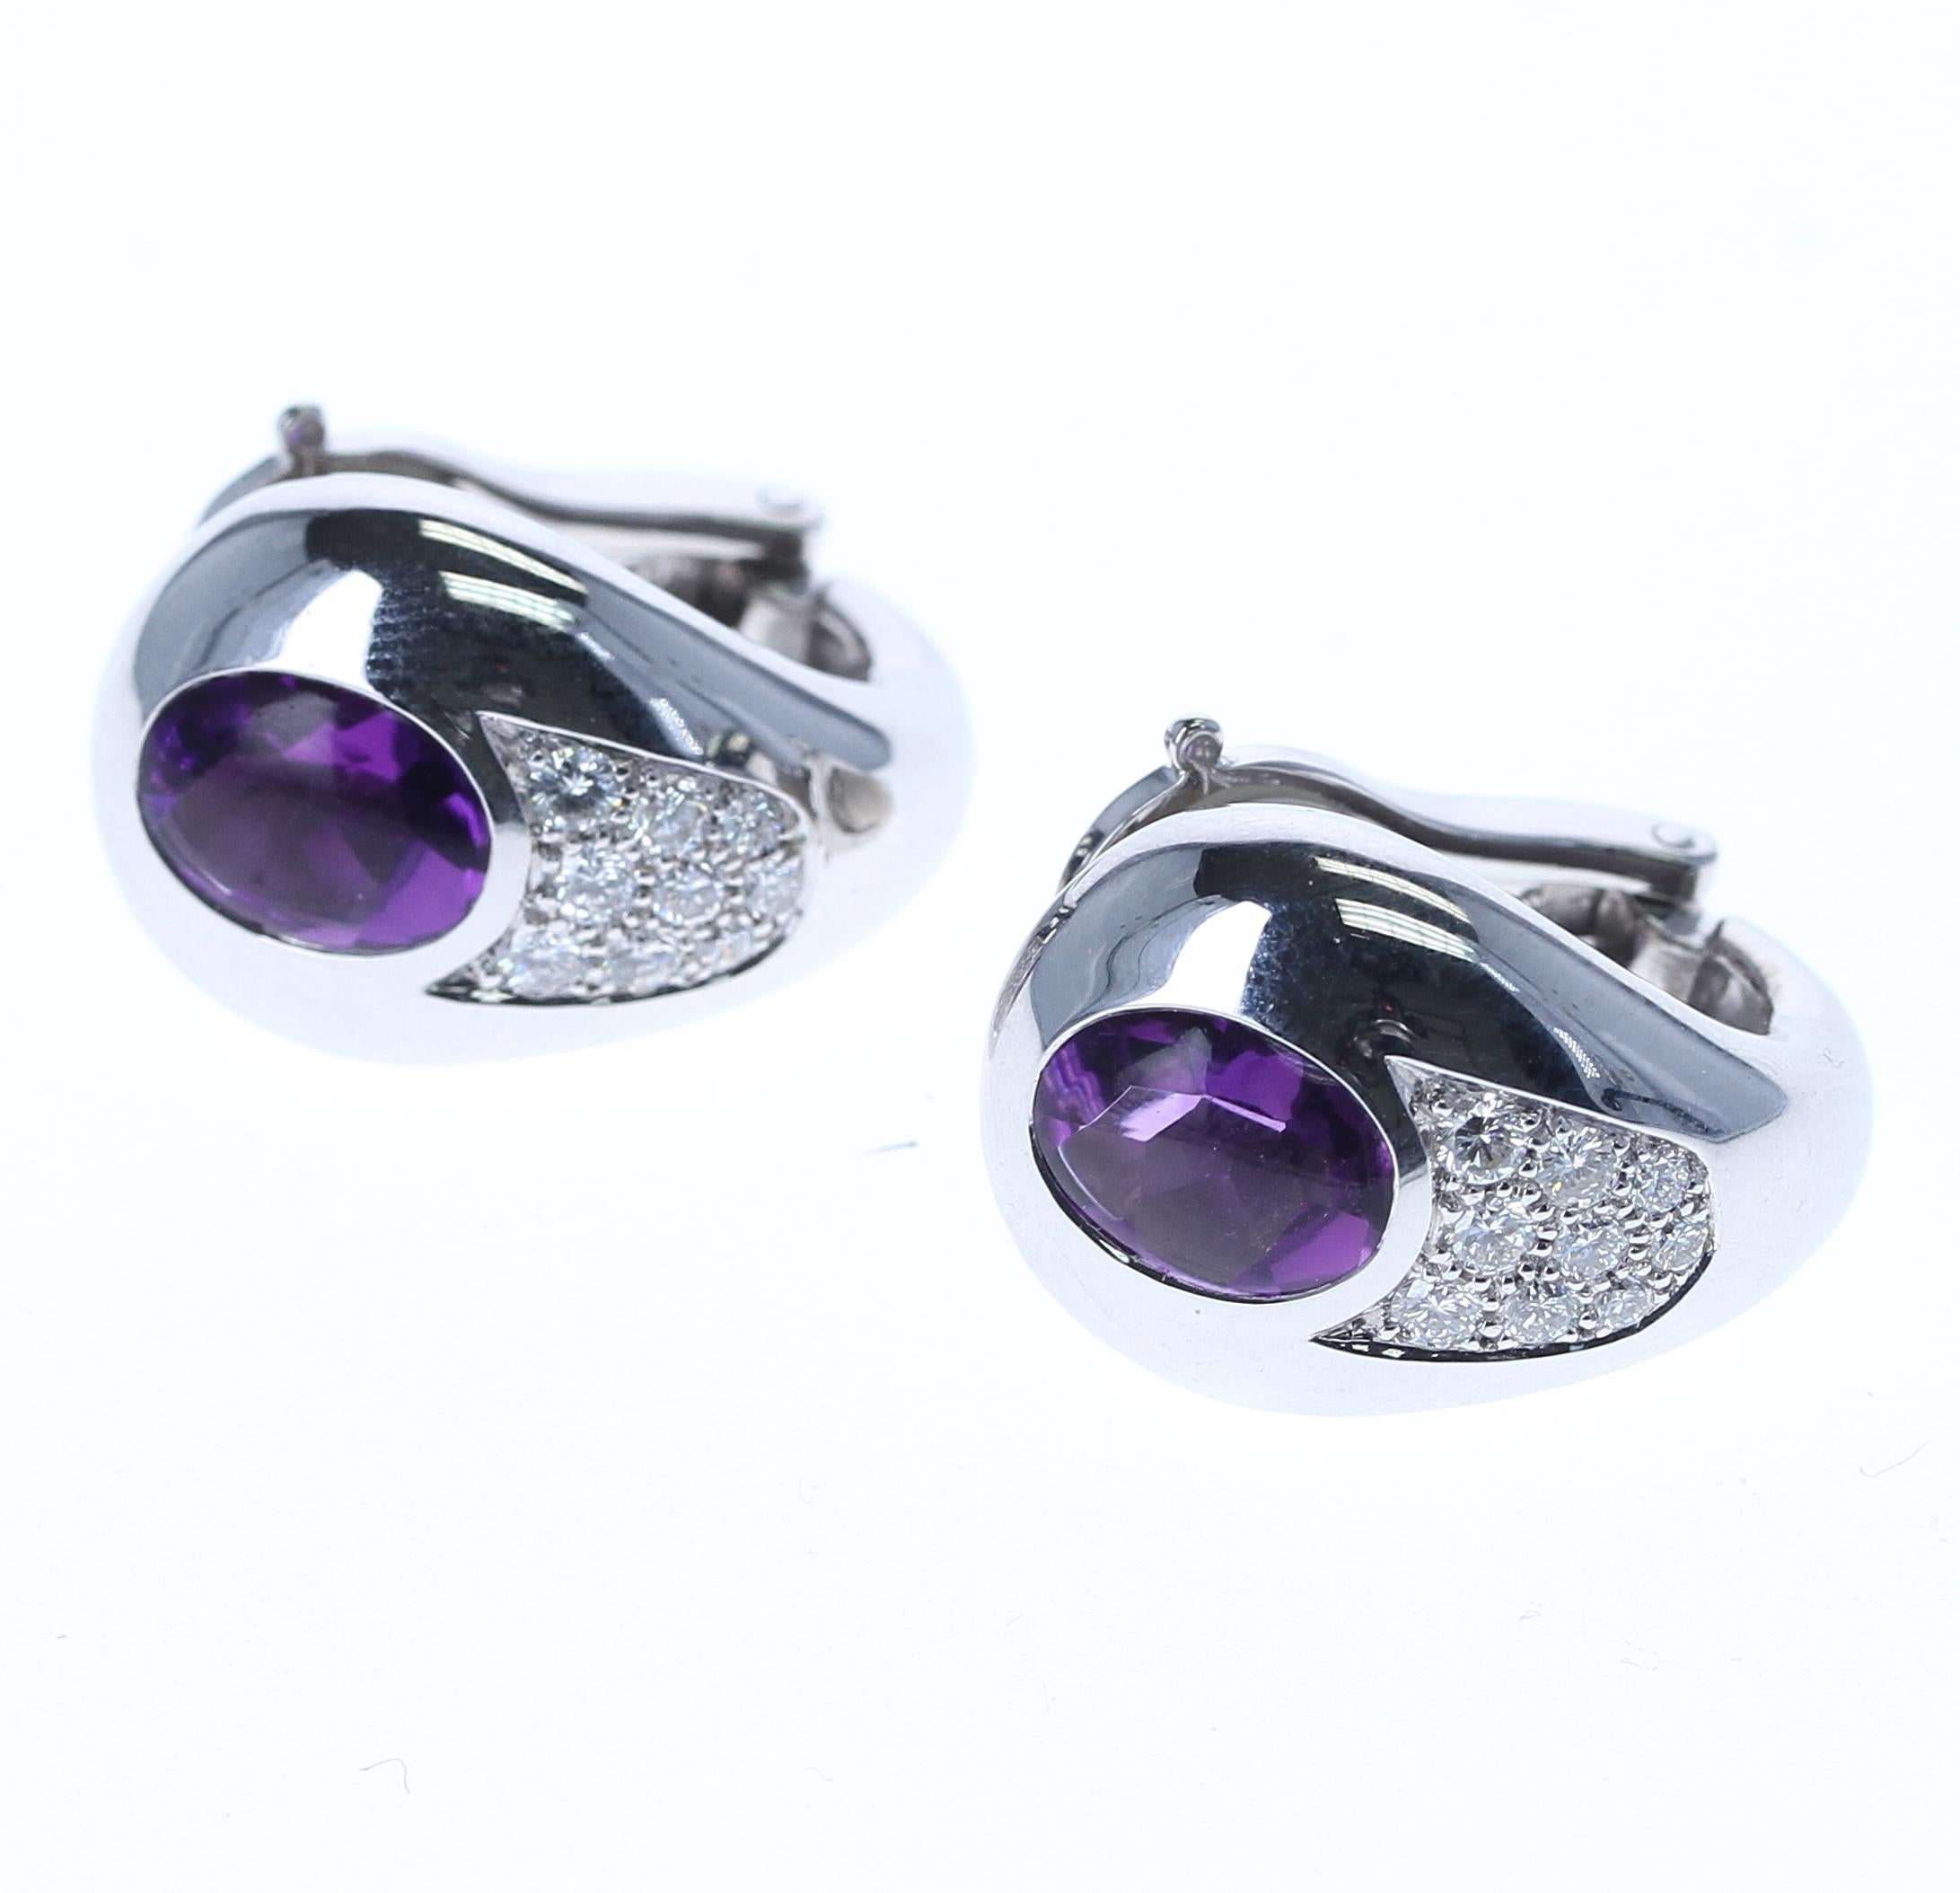 Mauboussin 2.20 ct. Amethyst and 0.42 ct. Diamond Earrings, 18K Gold In Excellent Condition For Sale In New York, NY